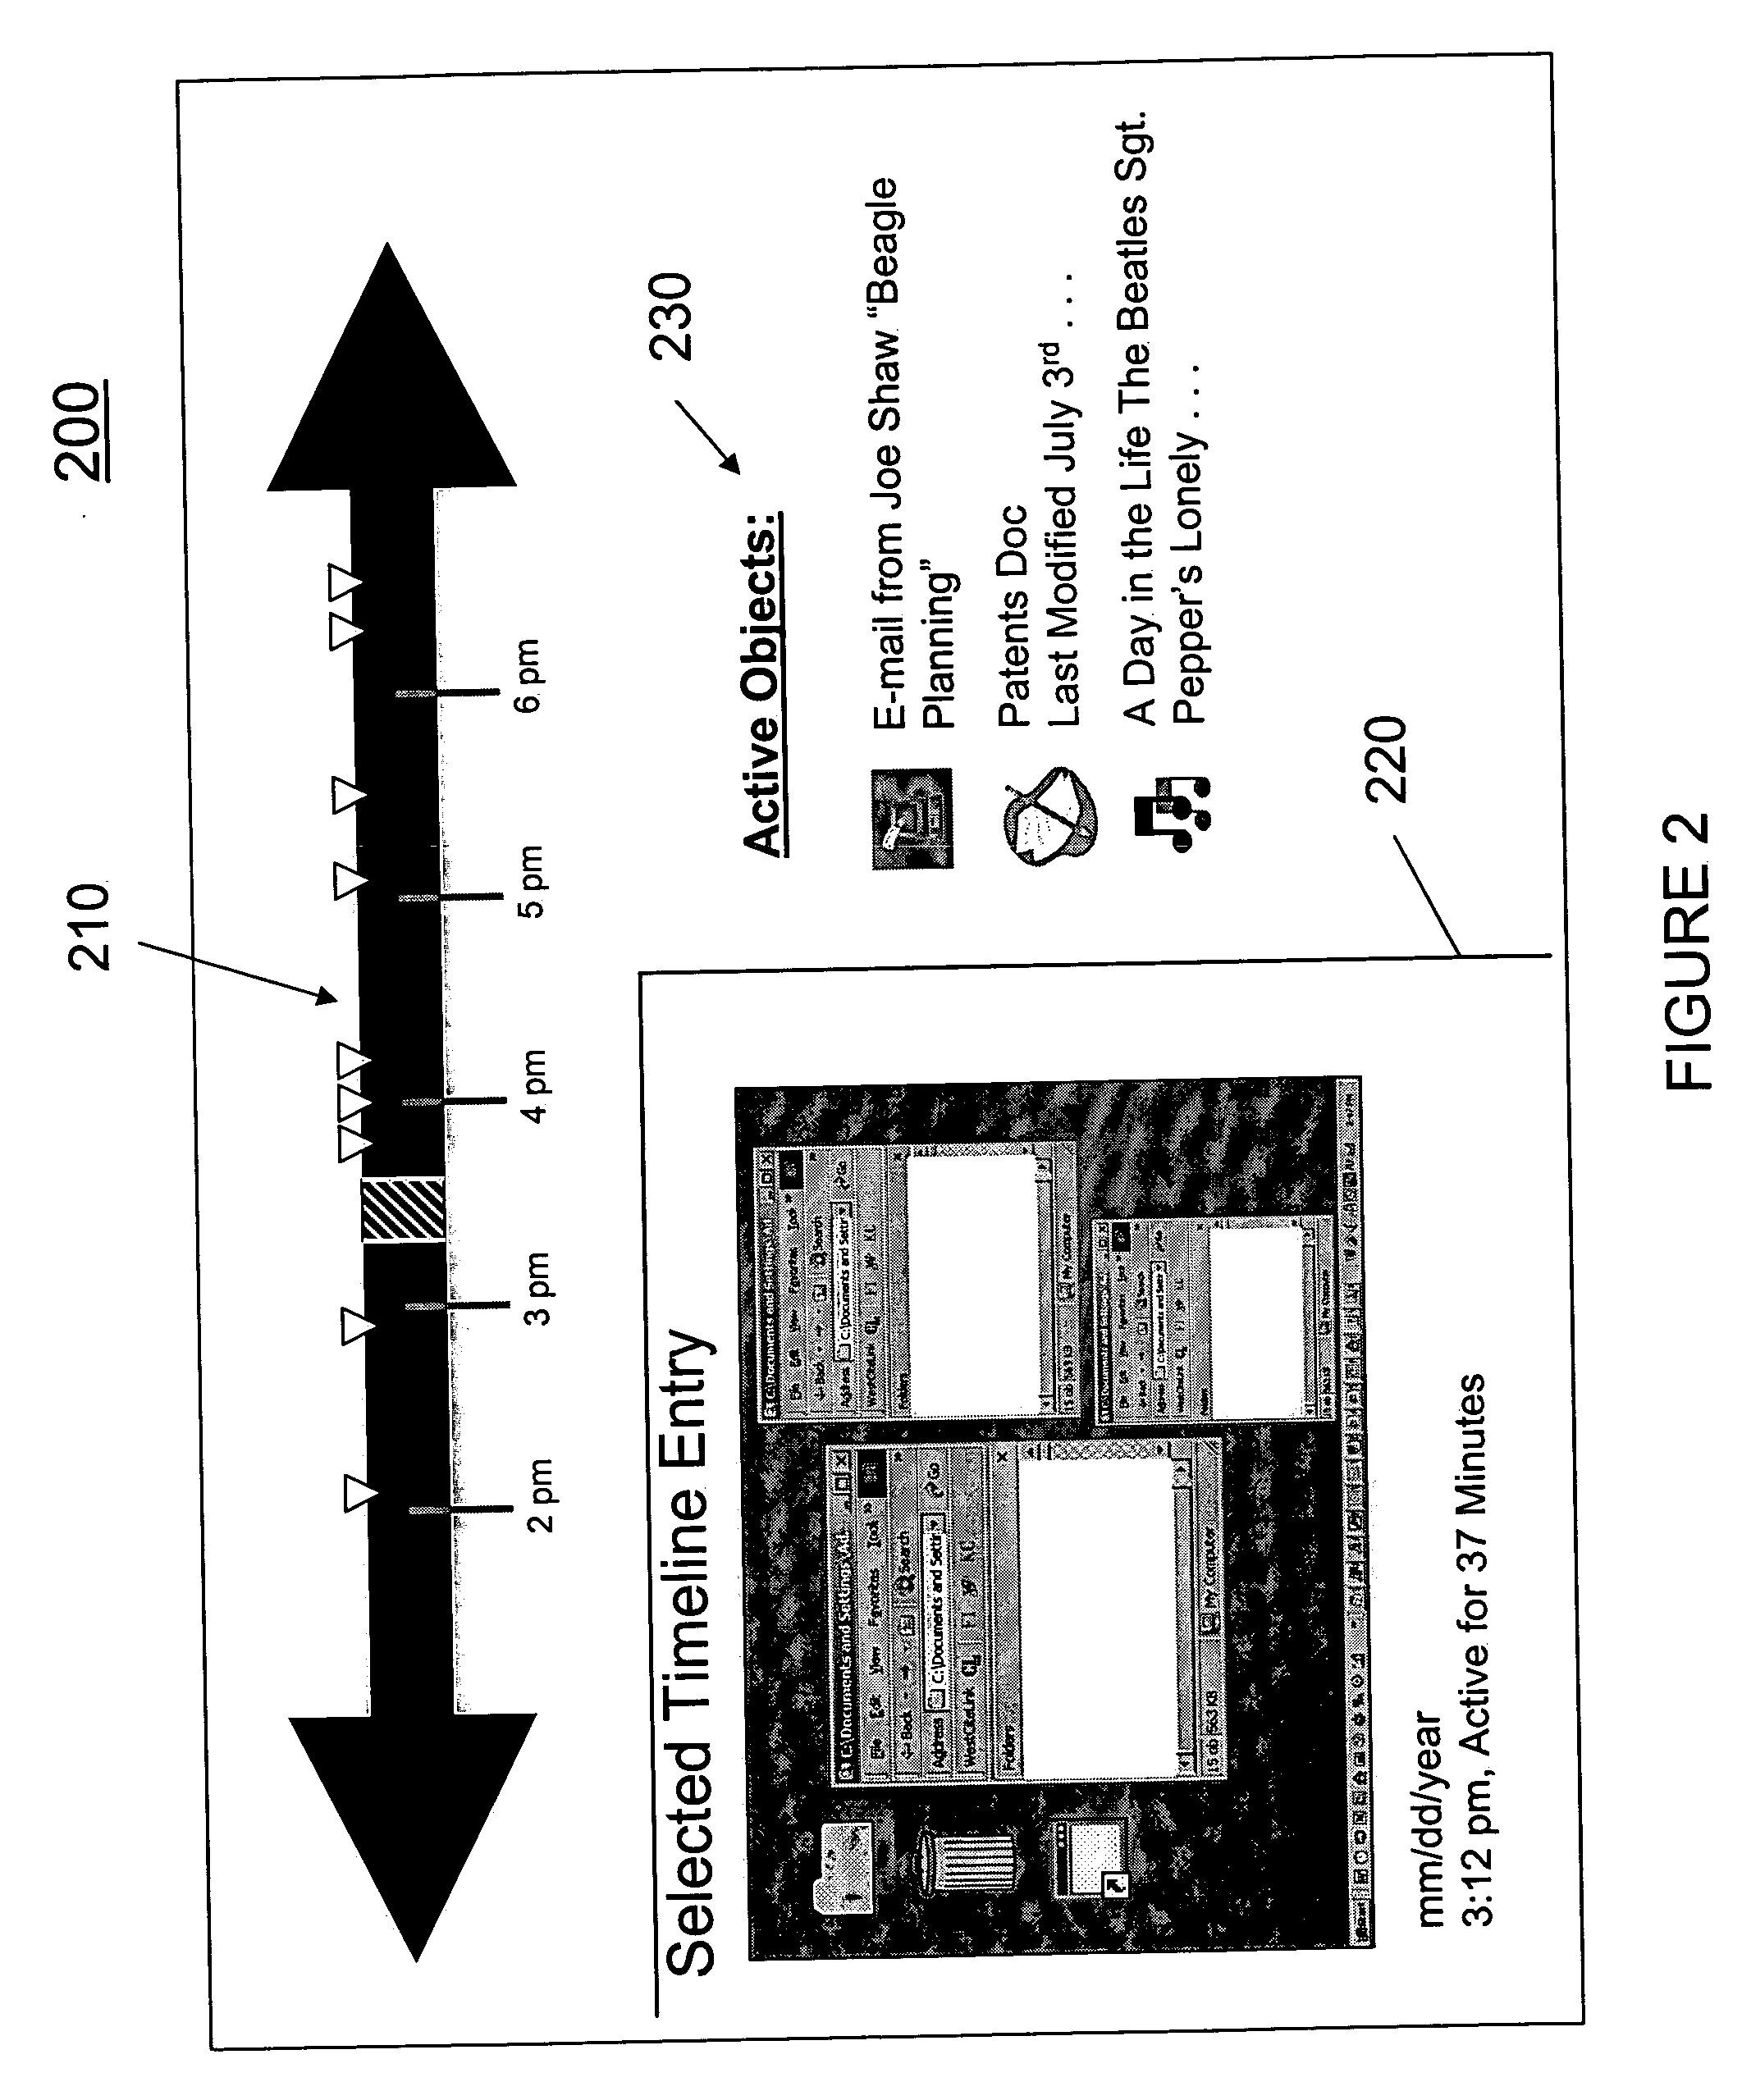 System and method of searching for information based on prior user actions